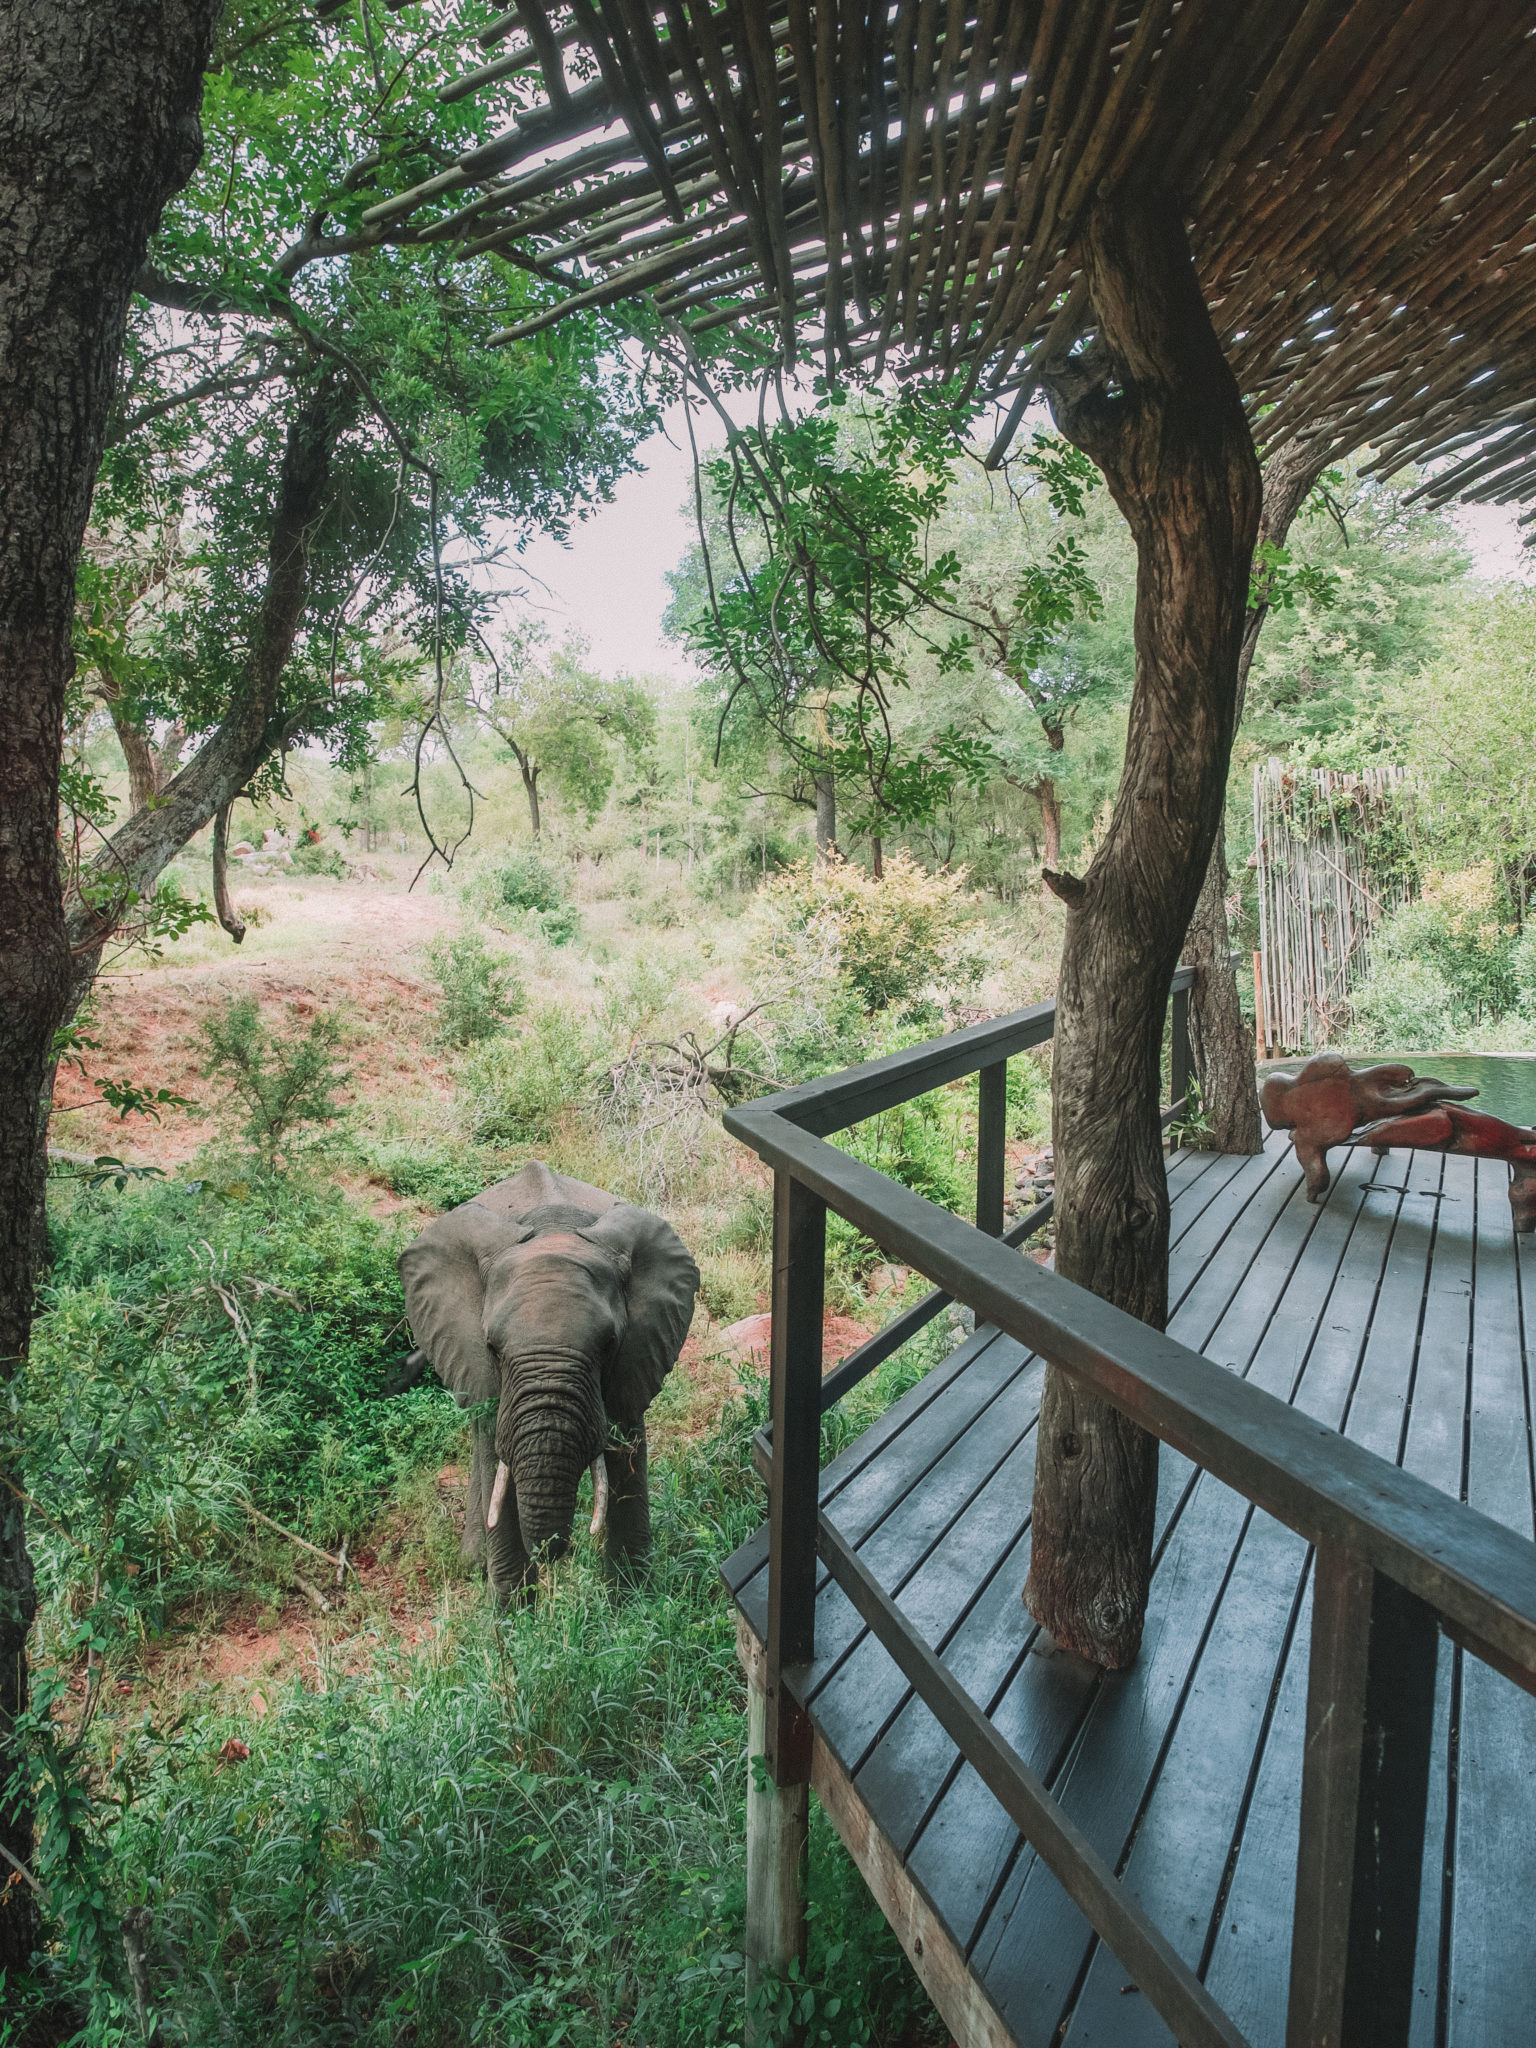 The 10 Best Safari Lodges in South Africa - World of Wanderlust